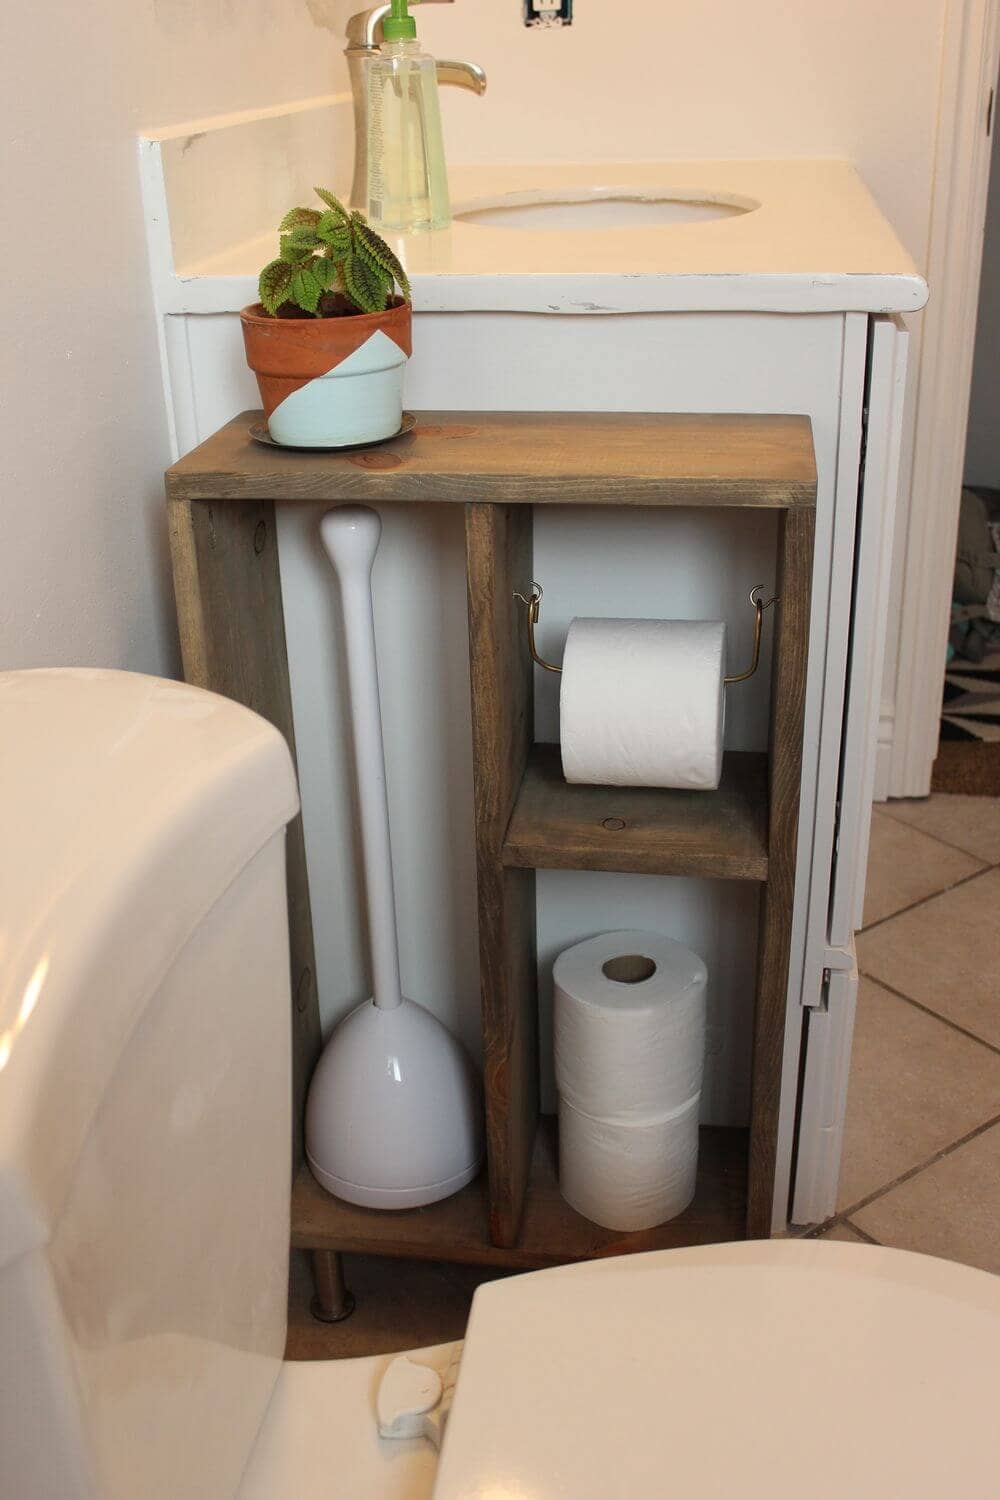 Pallet project ideas to decorate the bathroom - 67